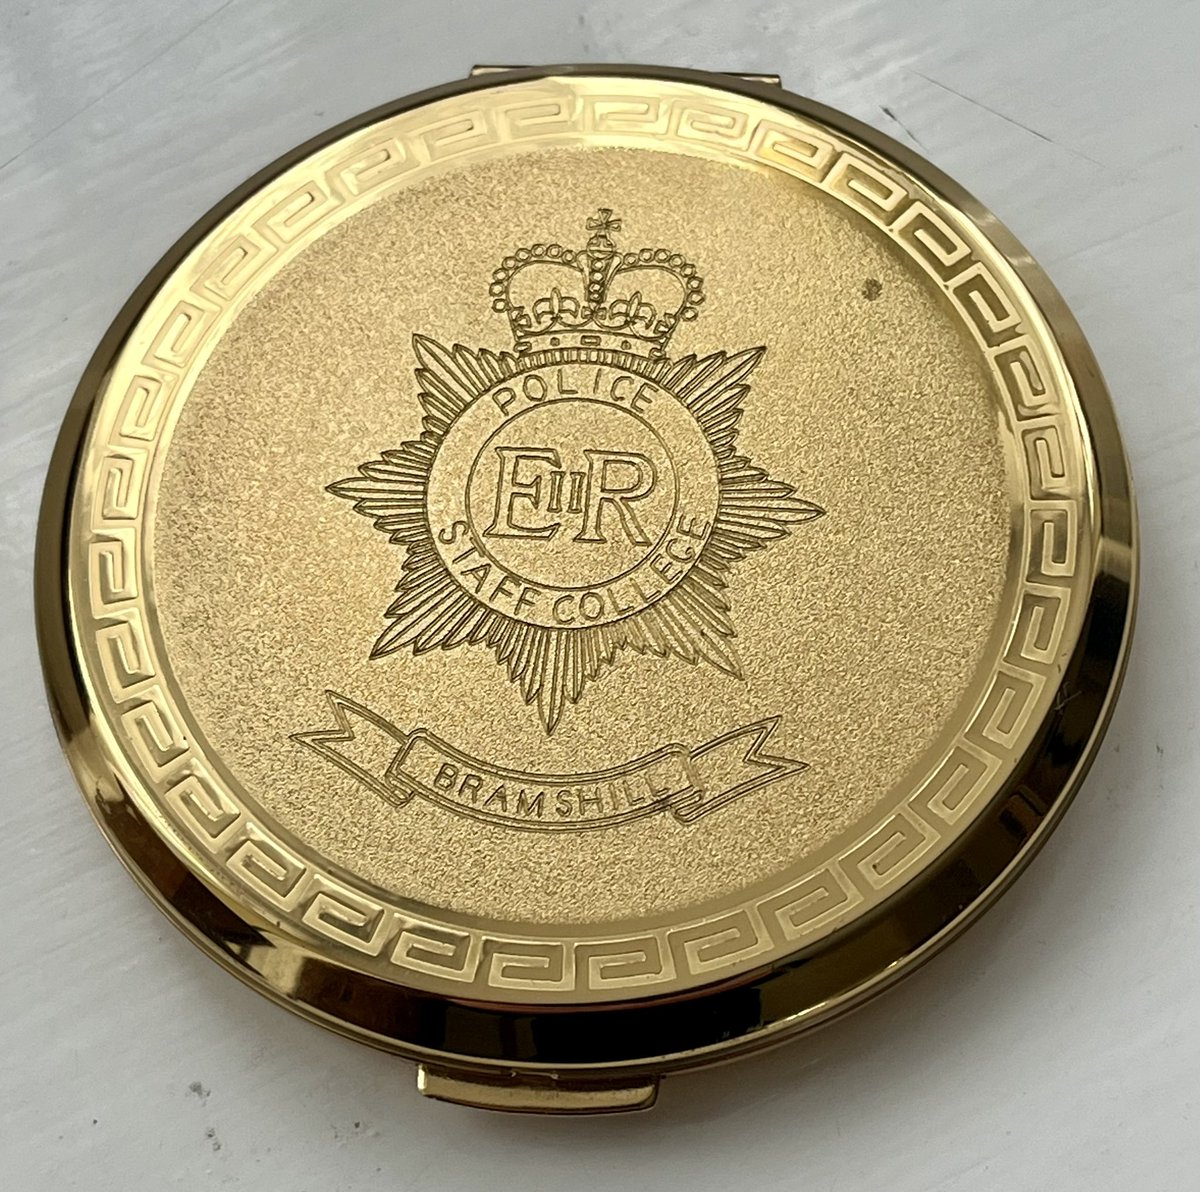 One from my mother in law’s collection #compact #policestaffcollege #bramshill #policeleadership #collectables